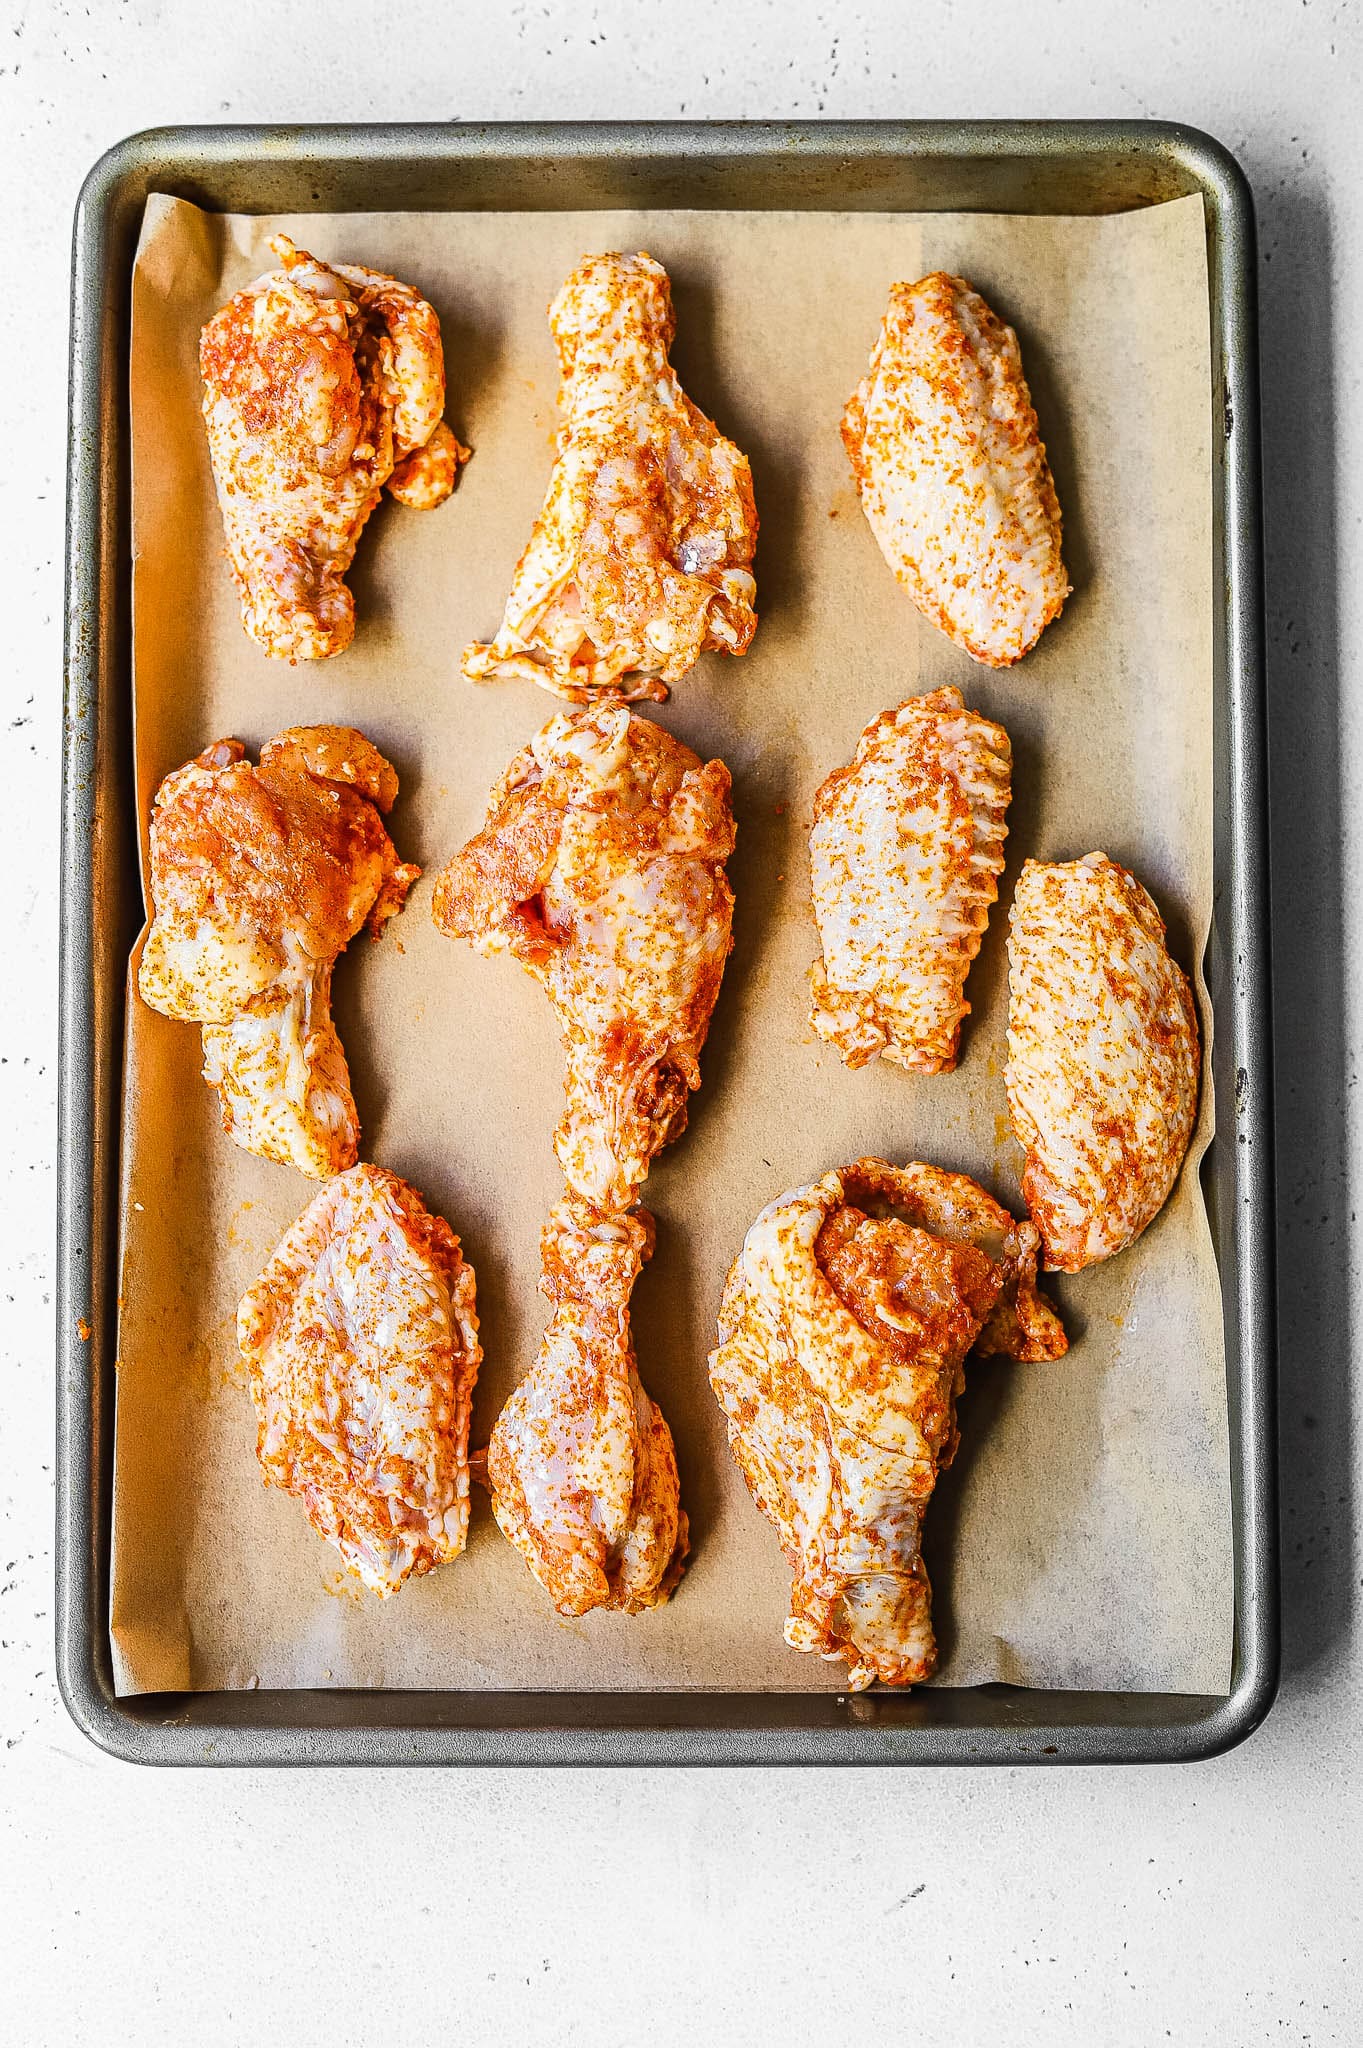 wings on a baking tray before baking